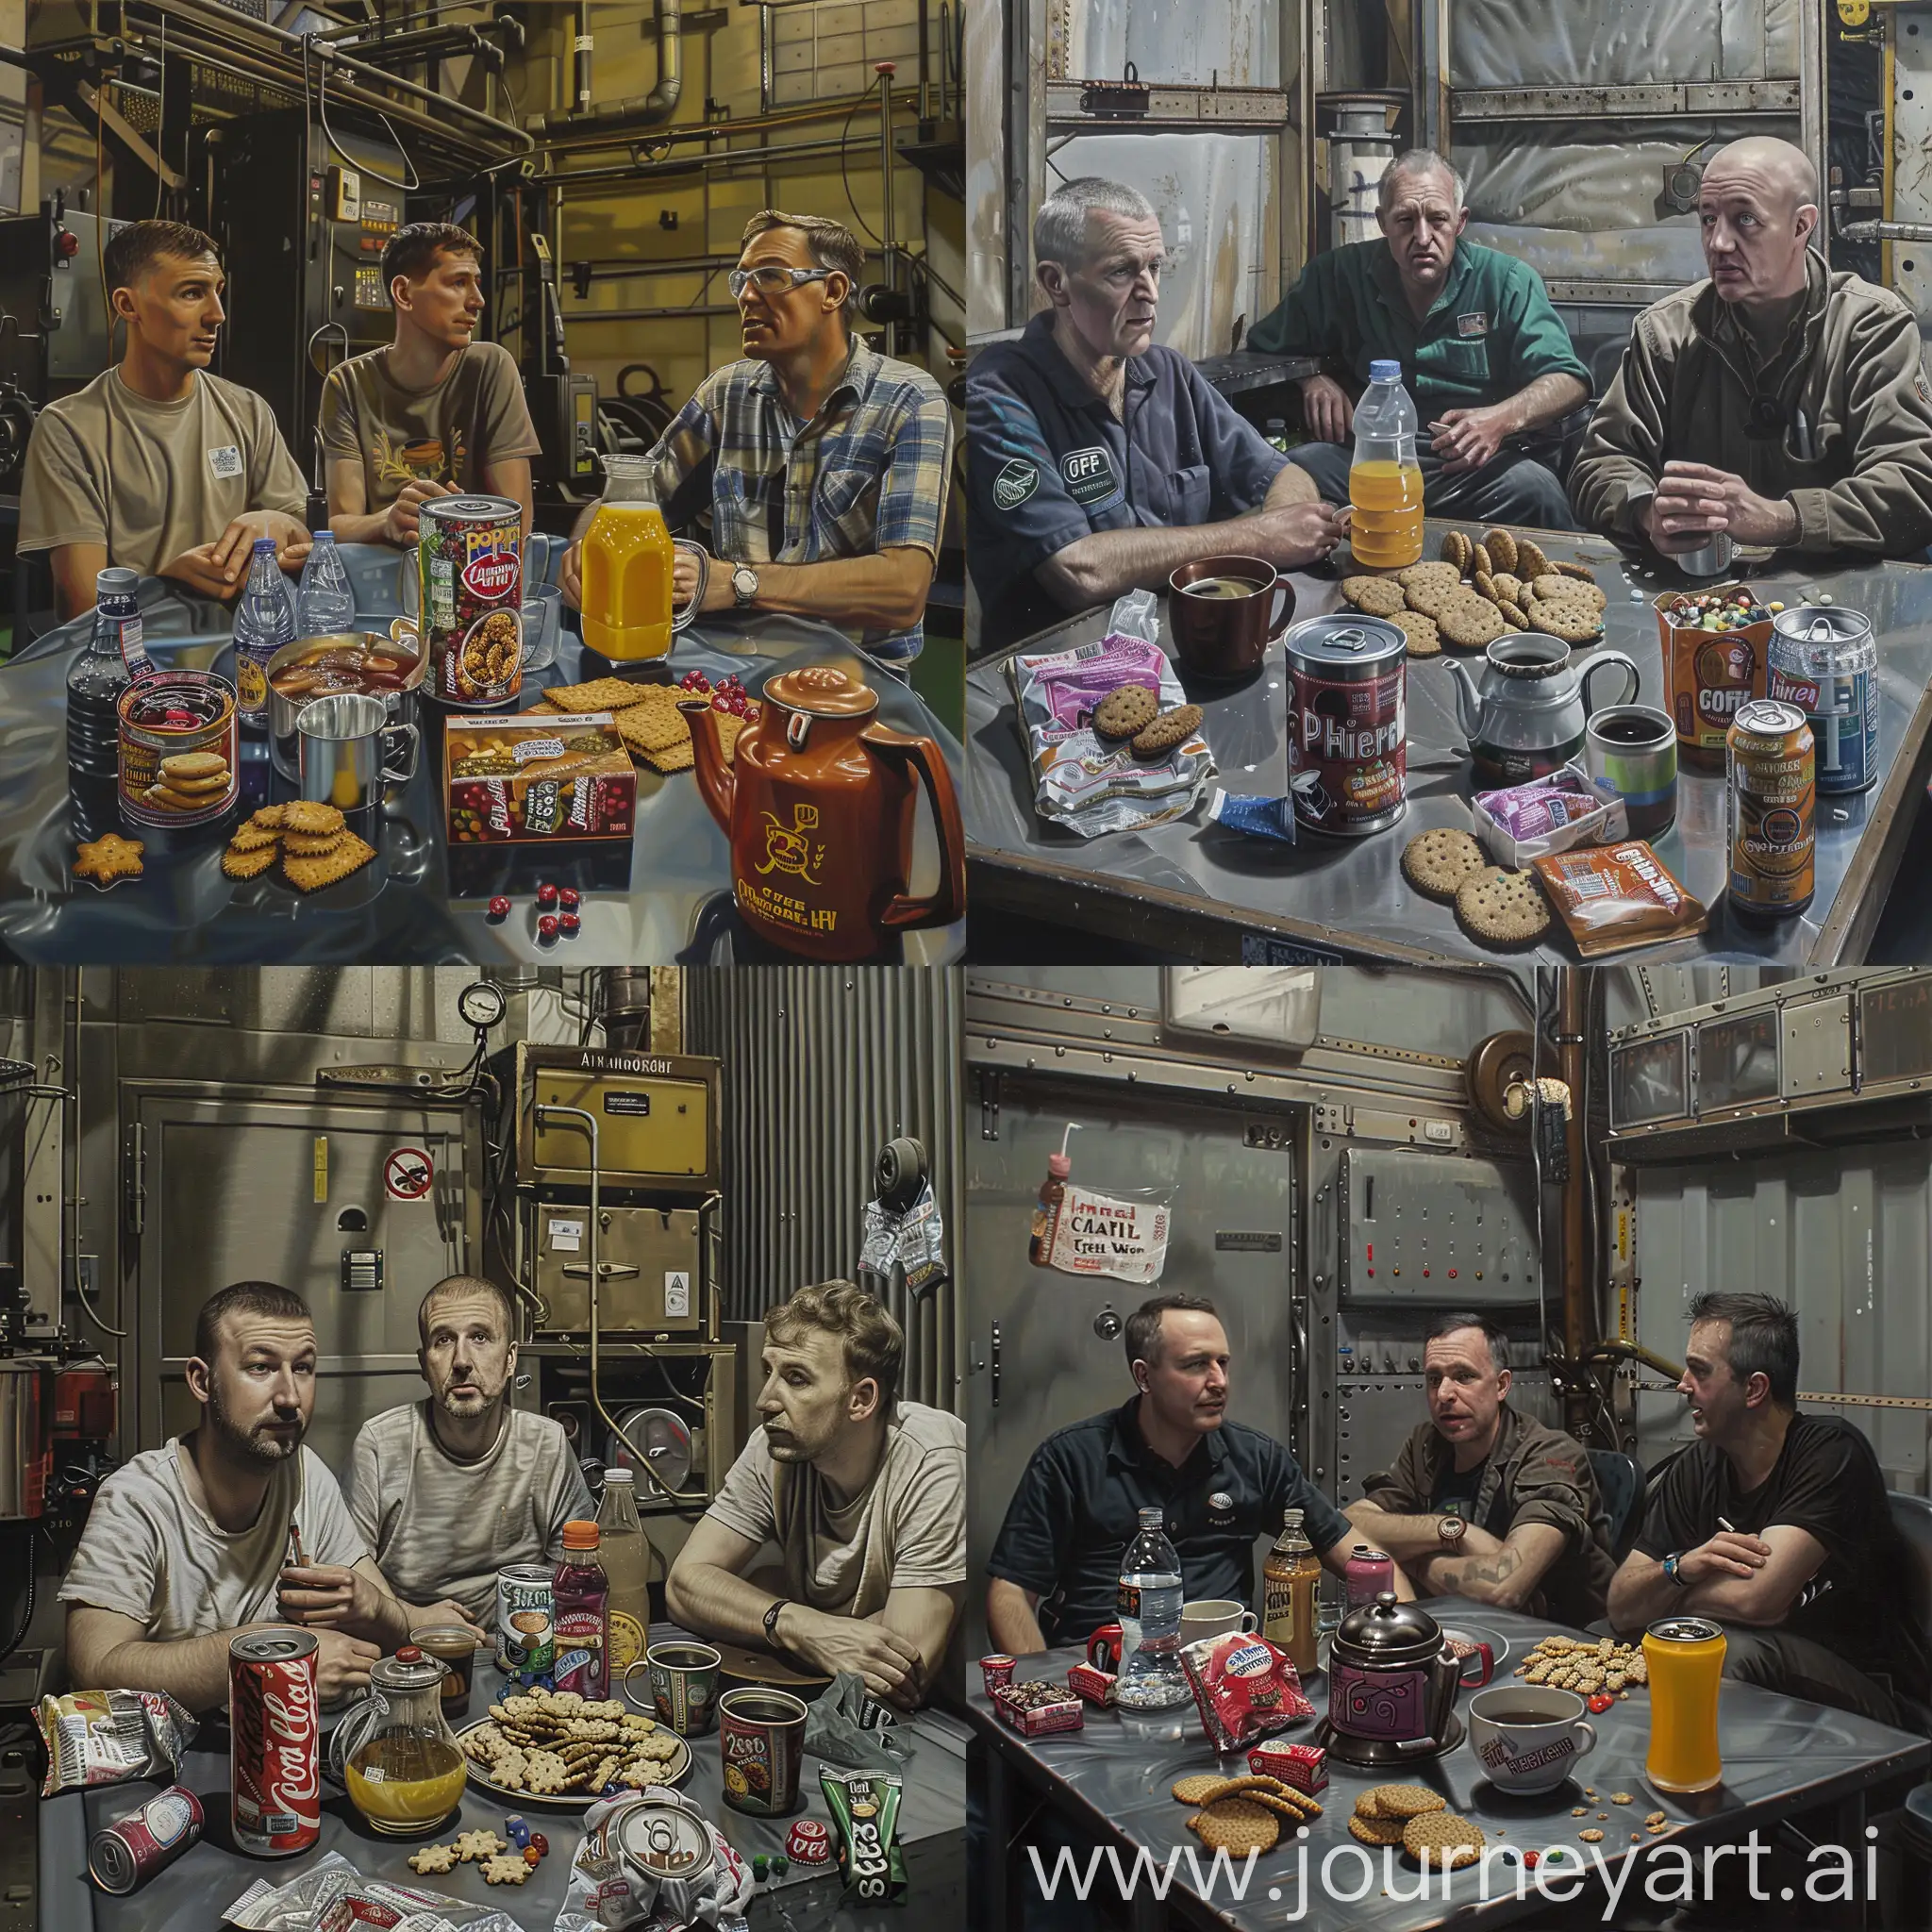 Men-Enjoying-Lunch-Break-in-Metalworking-Factory-Refreshments-and-Relaxation